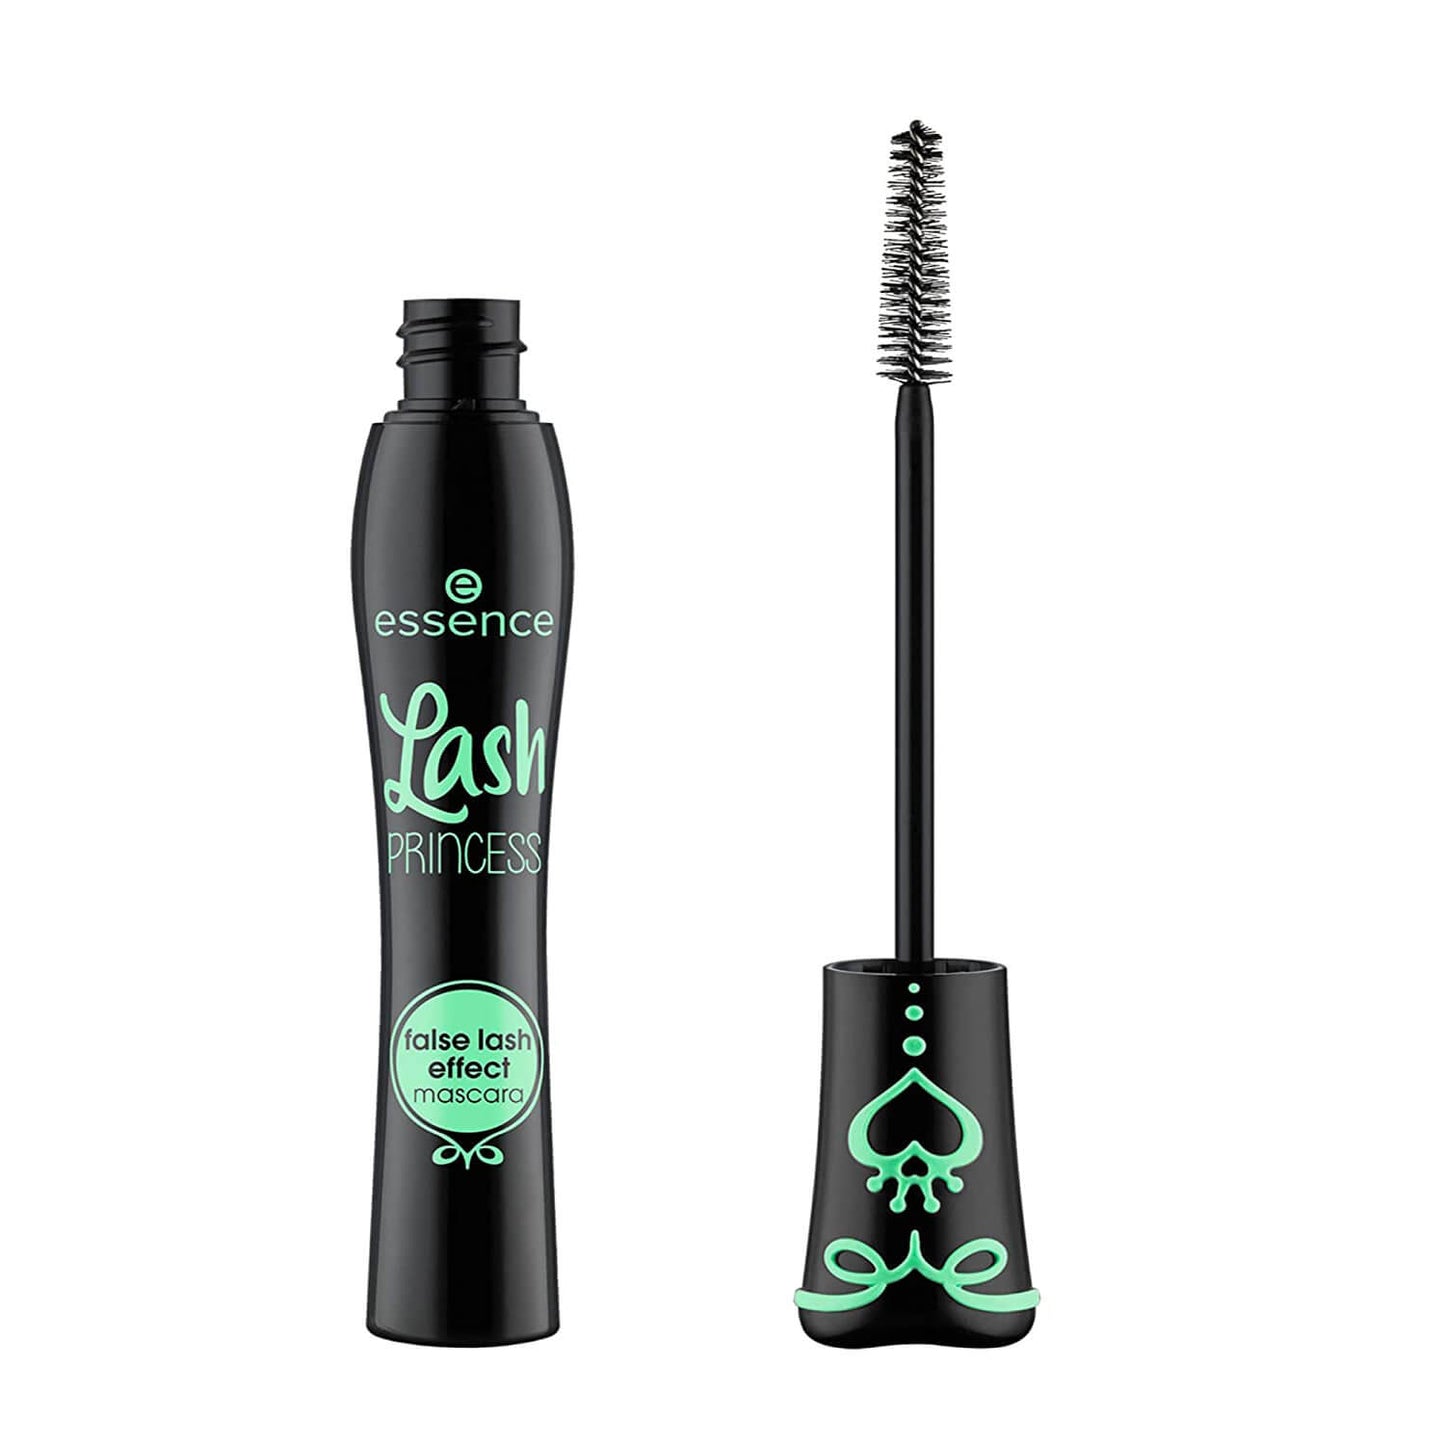 buy essence princess green false lash mascara available at heygirl.pk for delivery in Pakistan